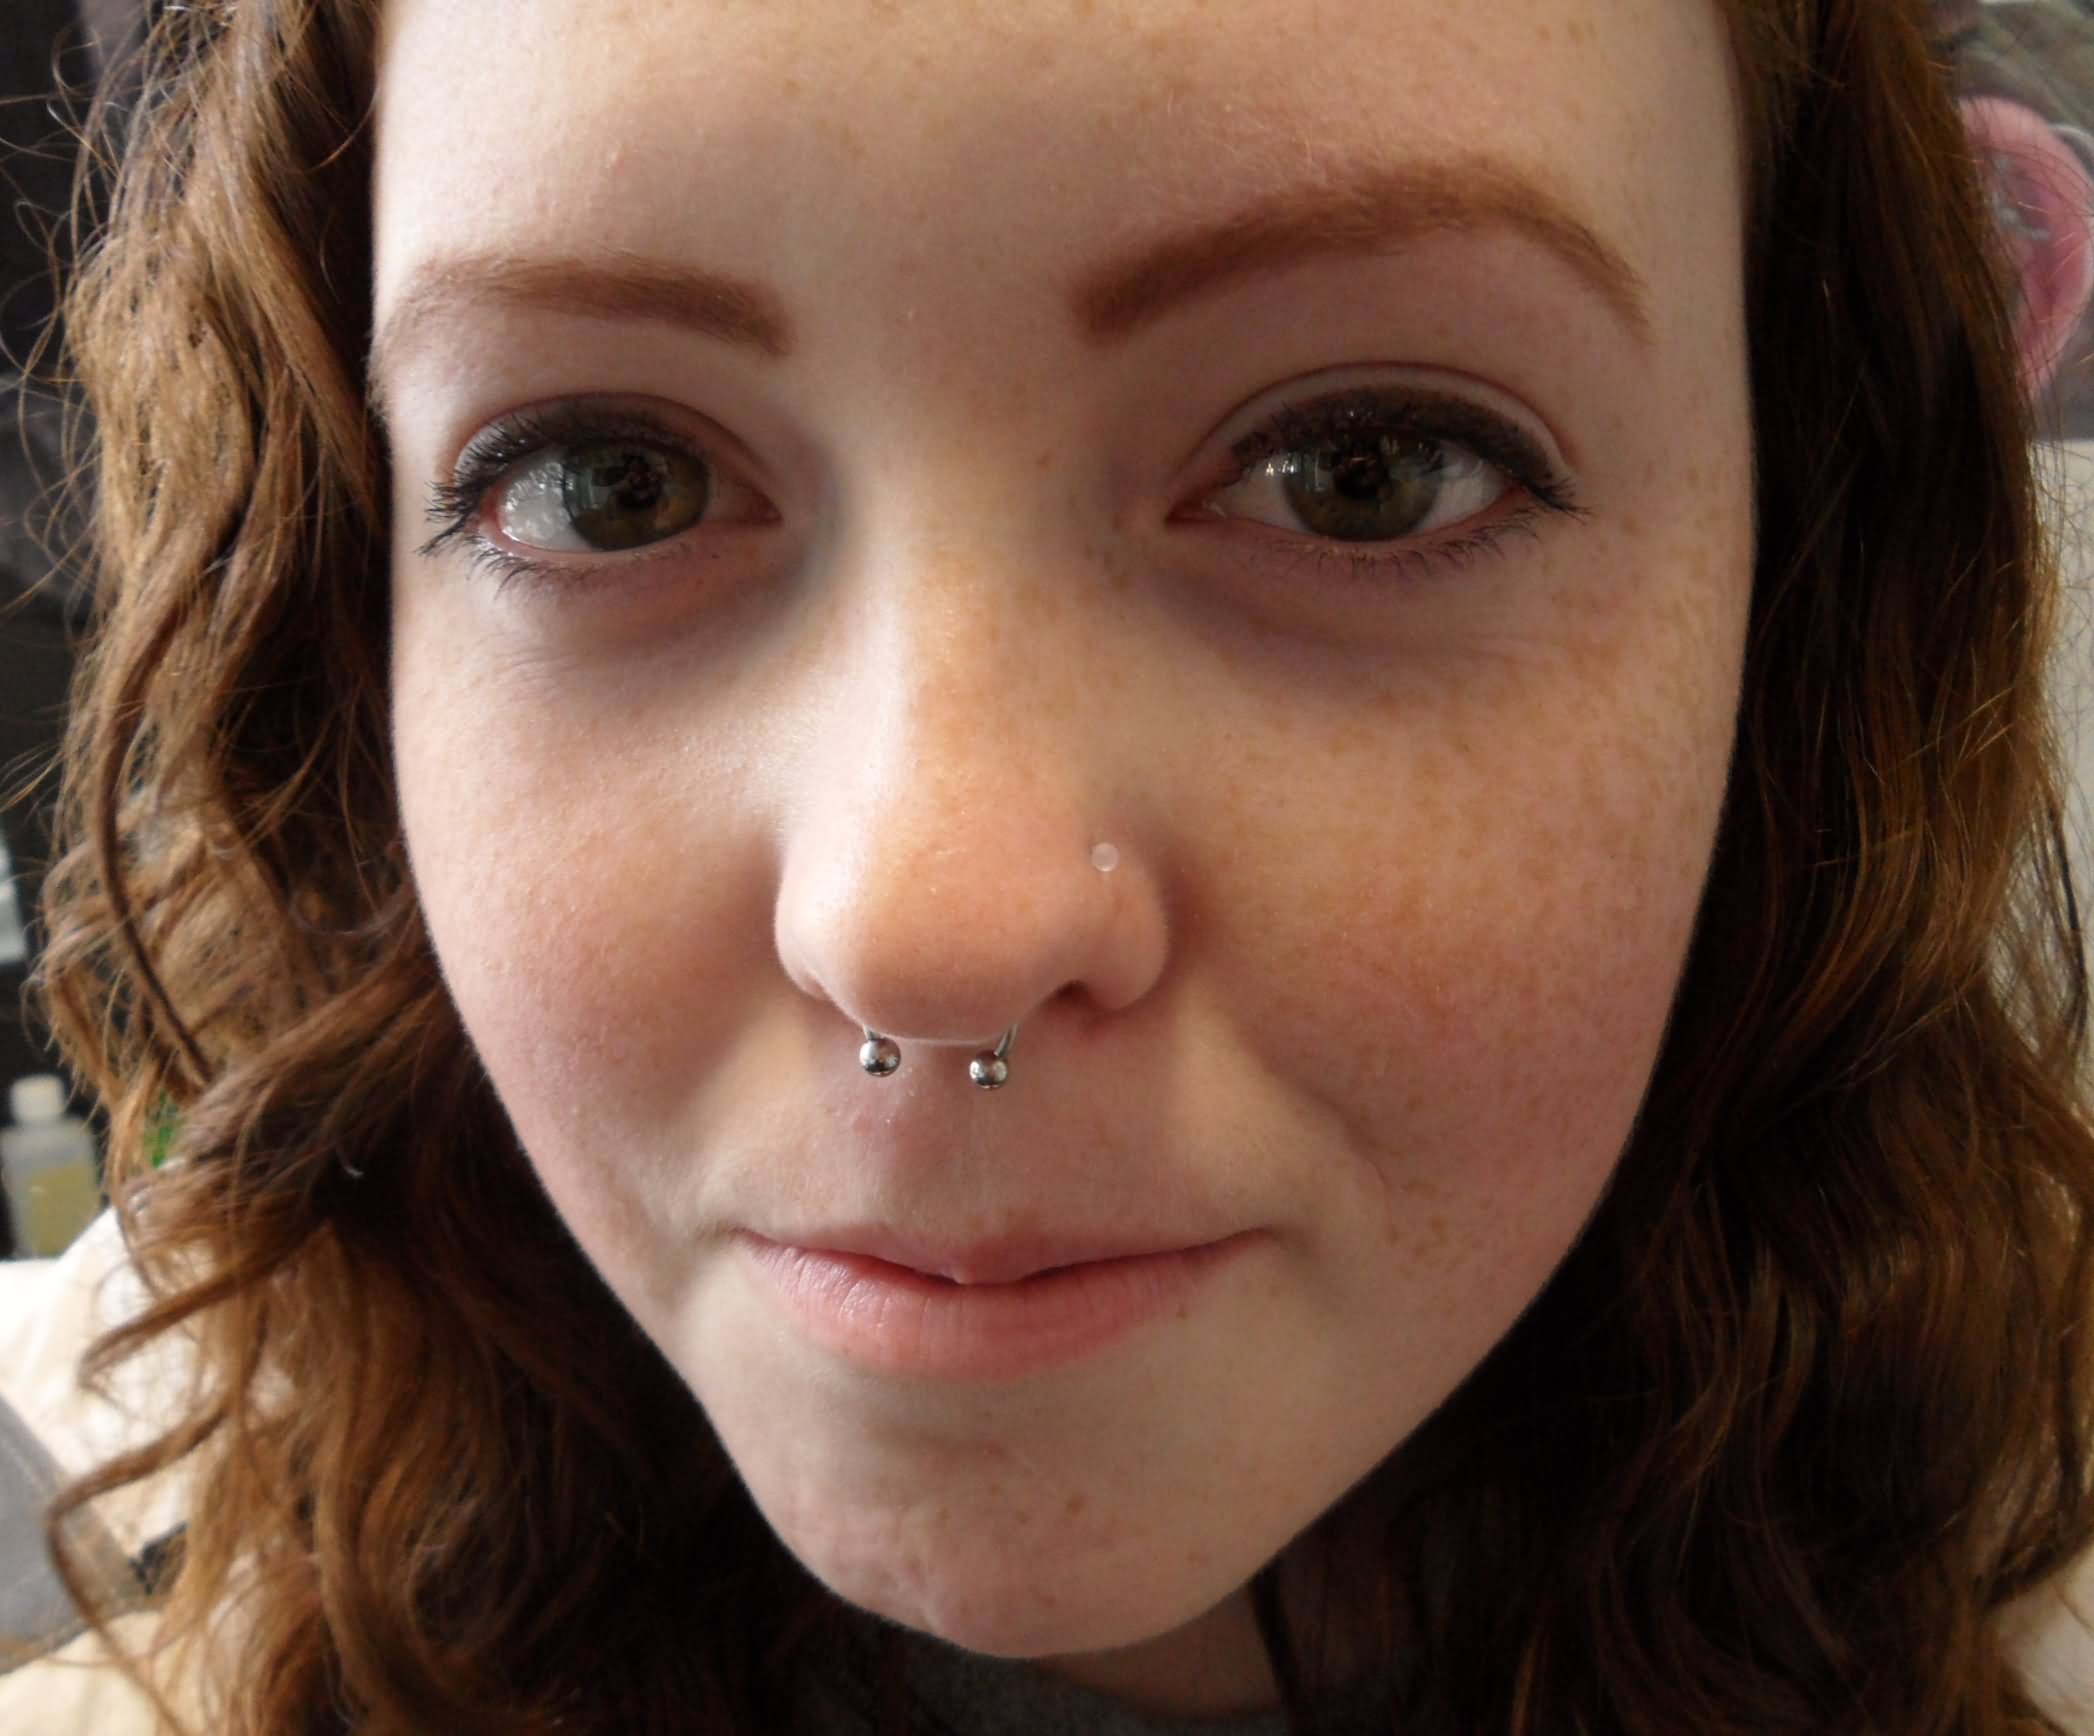 Girl With Septum Piercing With Ball Closure Ring